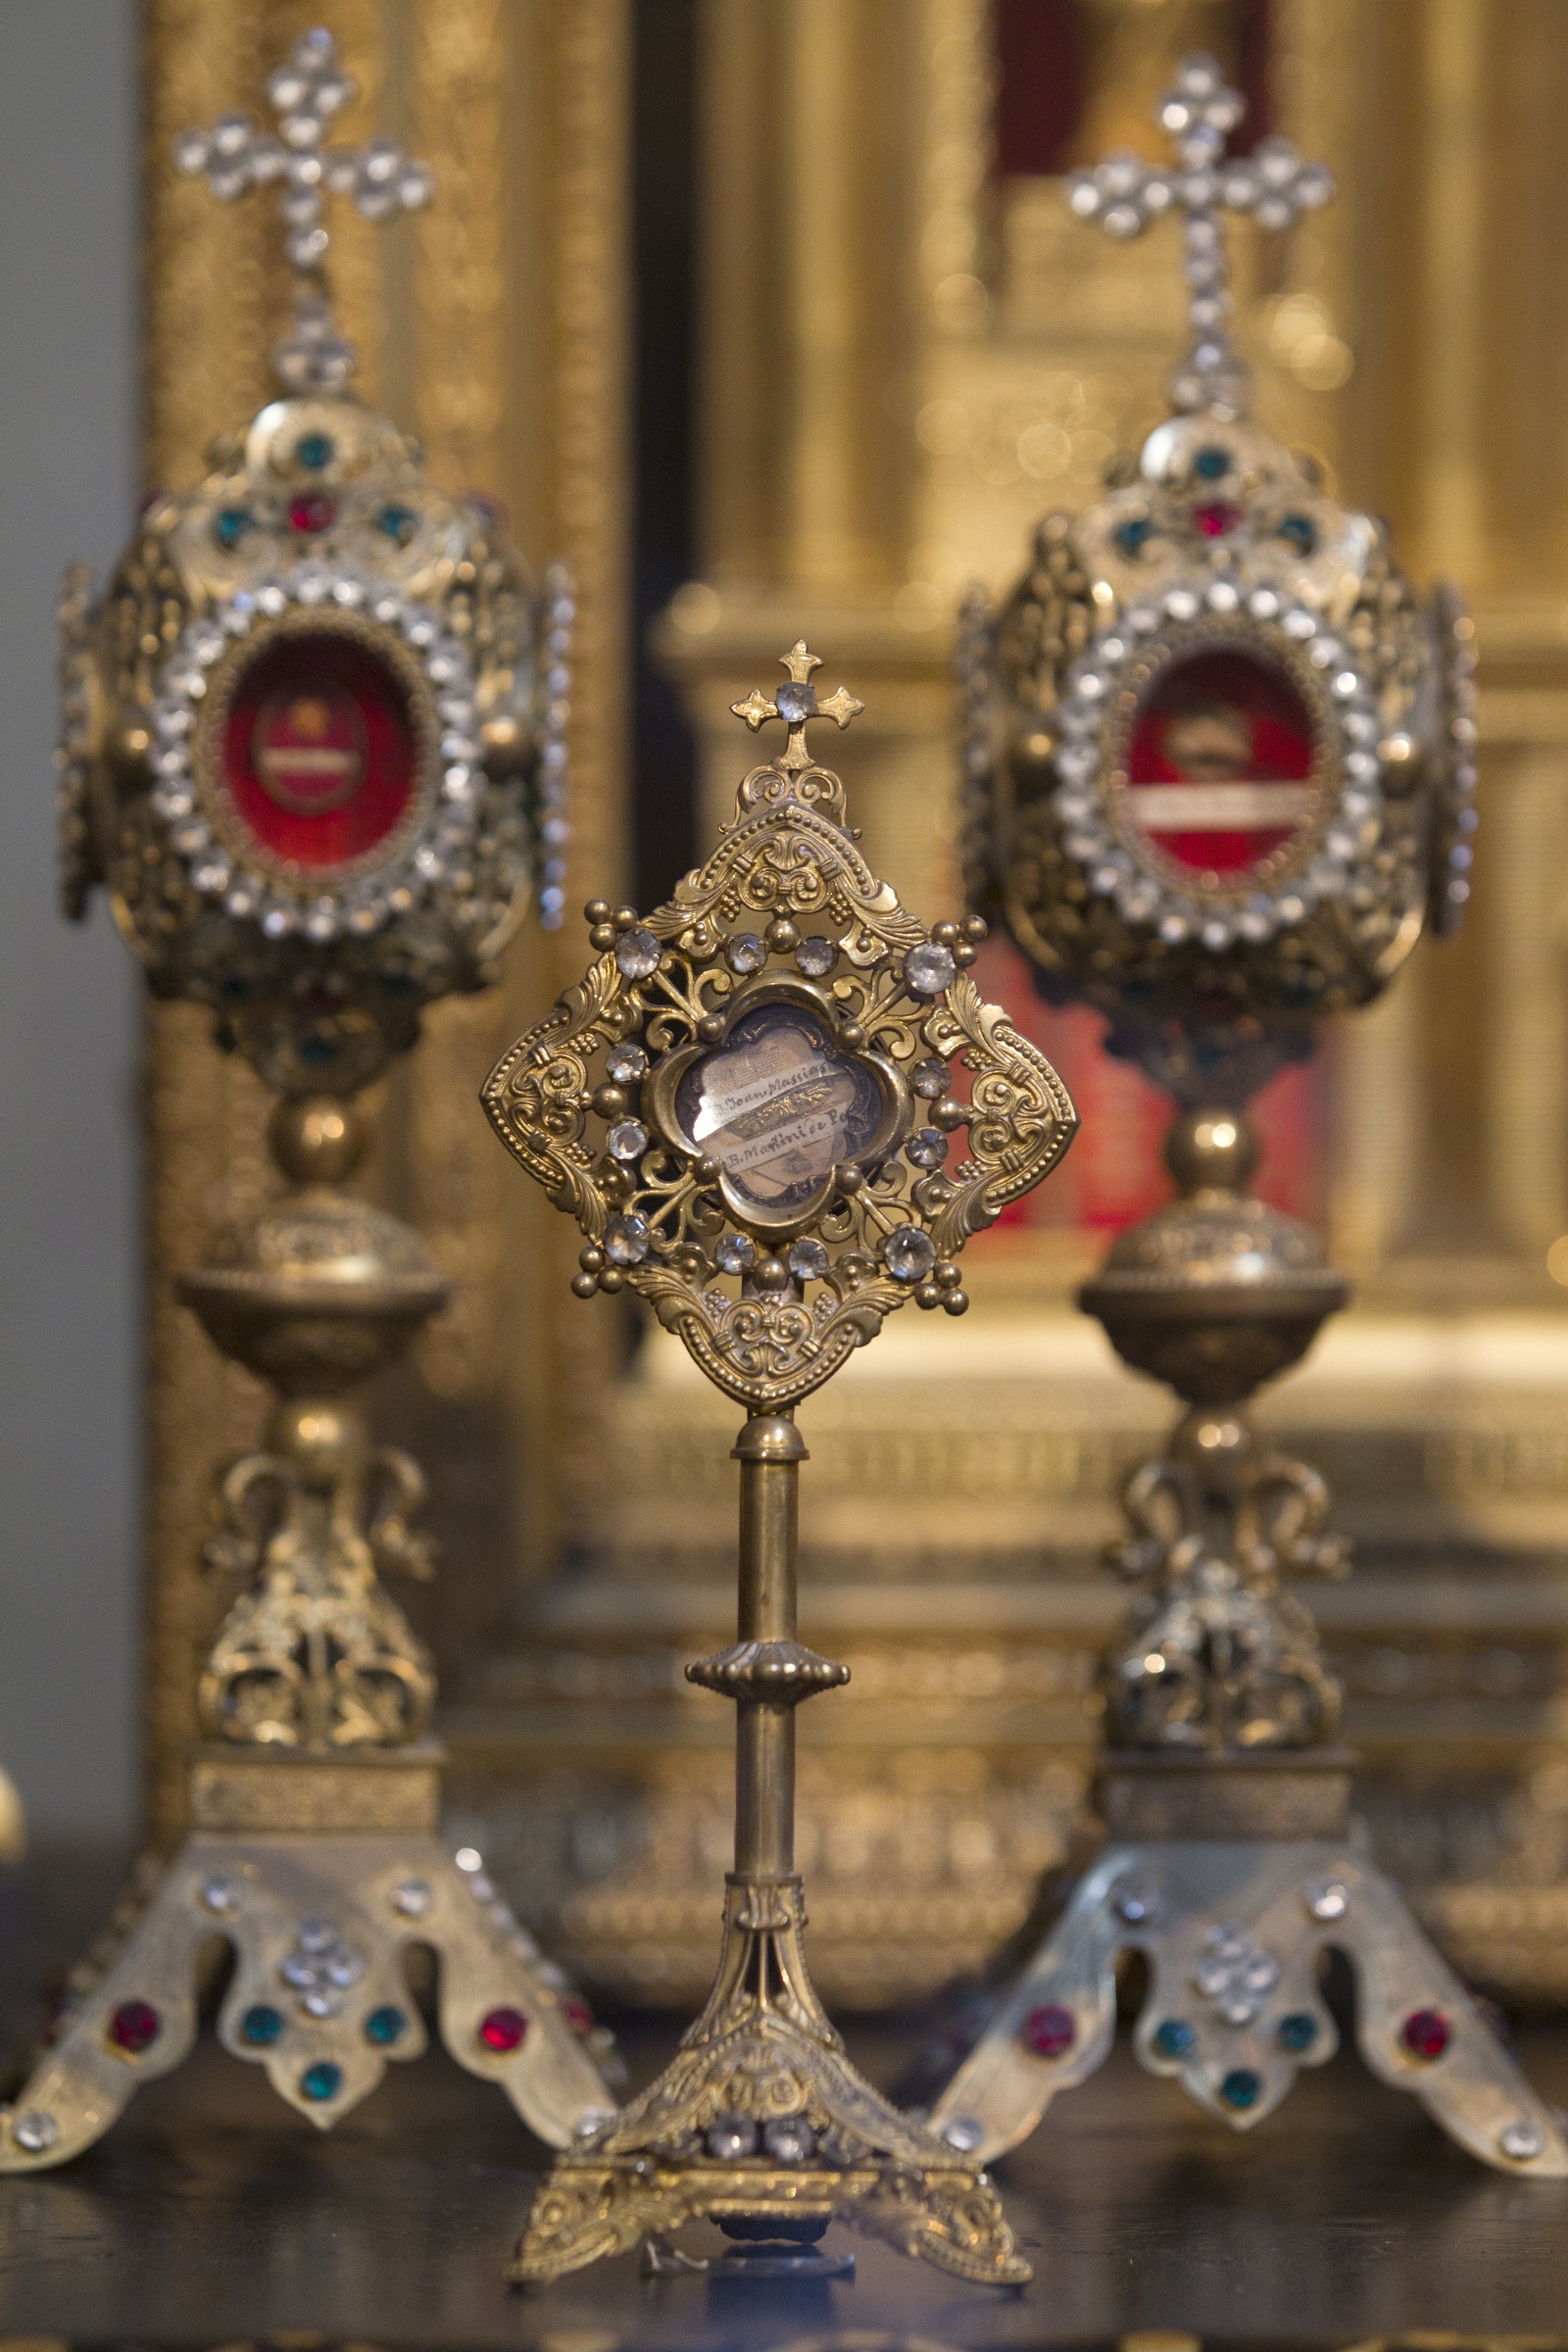 Relics marked with the names of Sts. John Masias and Martin de Porres at St. Anthony's Chapel in Pittsburgh (CNS/Nancy Wiechec)